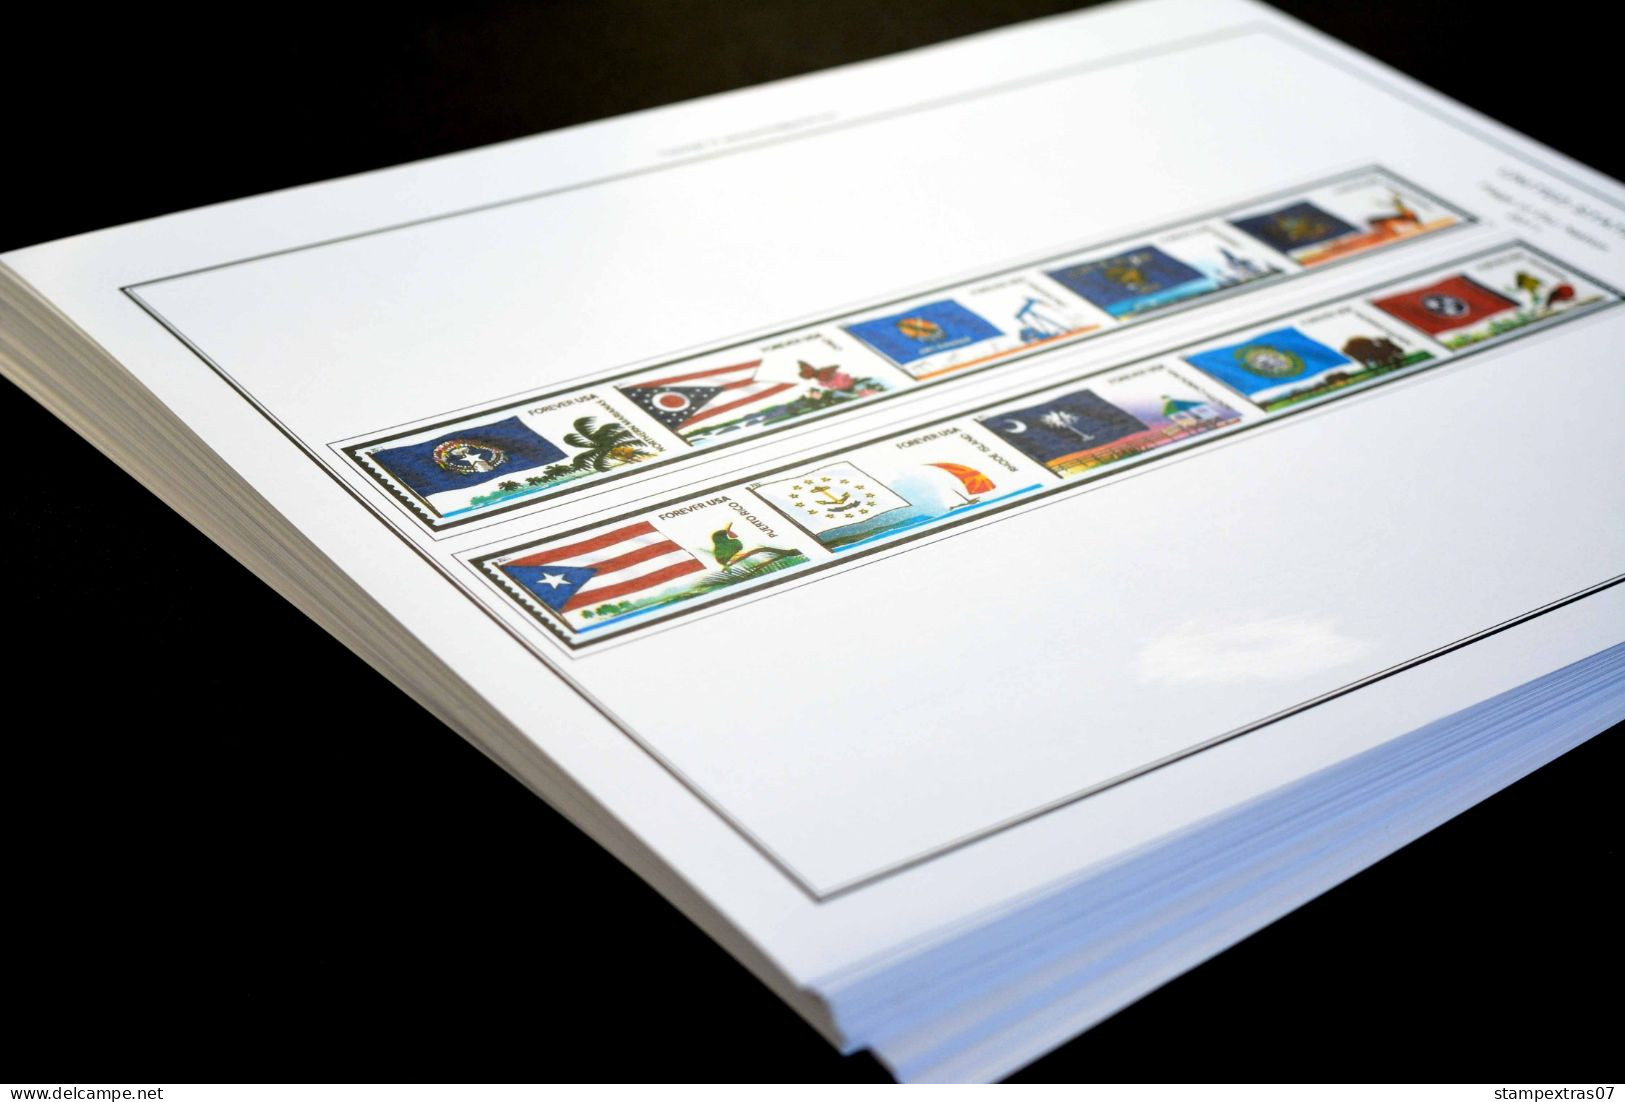 COLOR PRINTED USA 2011-2020 STAMP ALBUM PAGES (101 Illustrated Pages) >> FEUILLES ALBUM - Pre-printed Pages